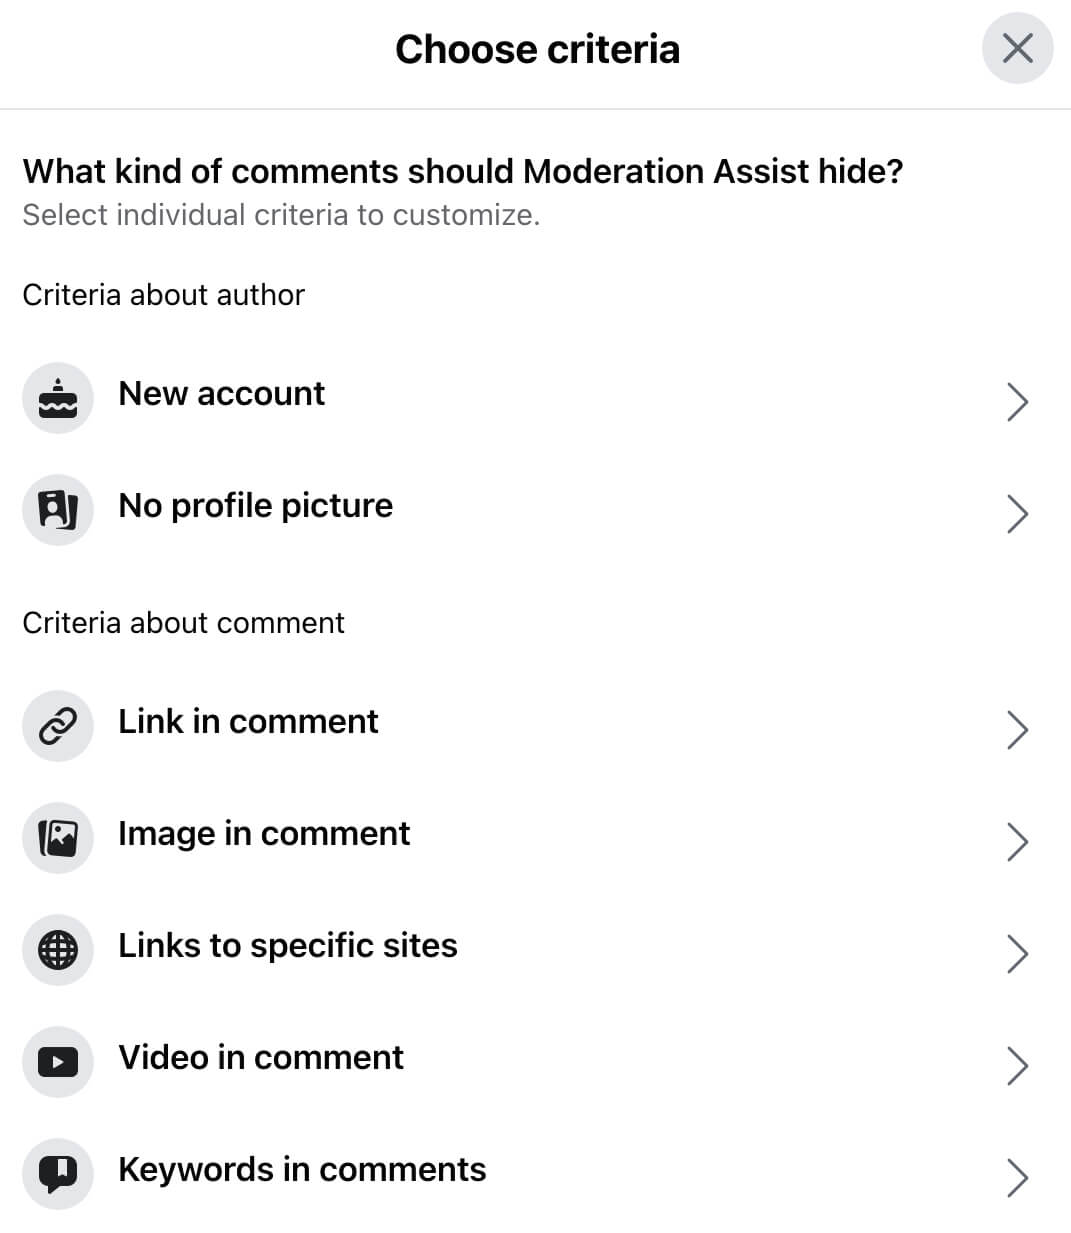 criteria settings for facebook moderation assist